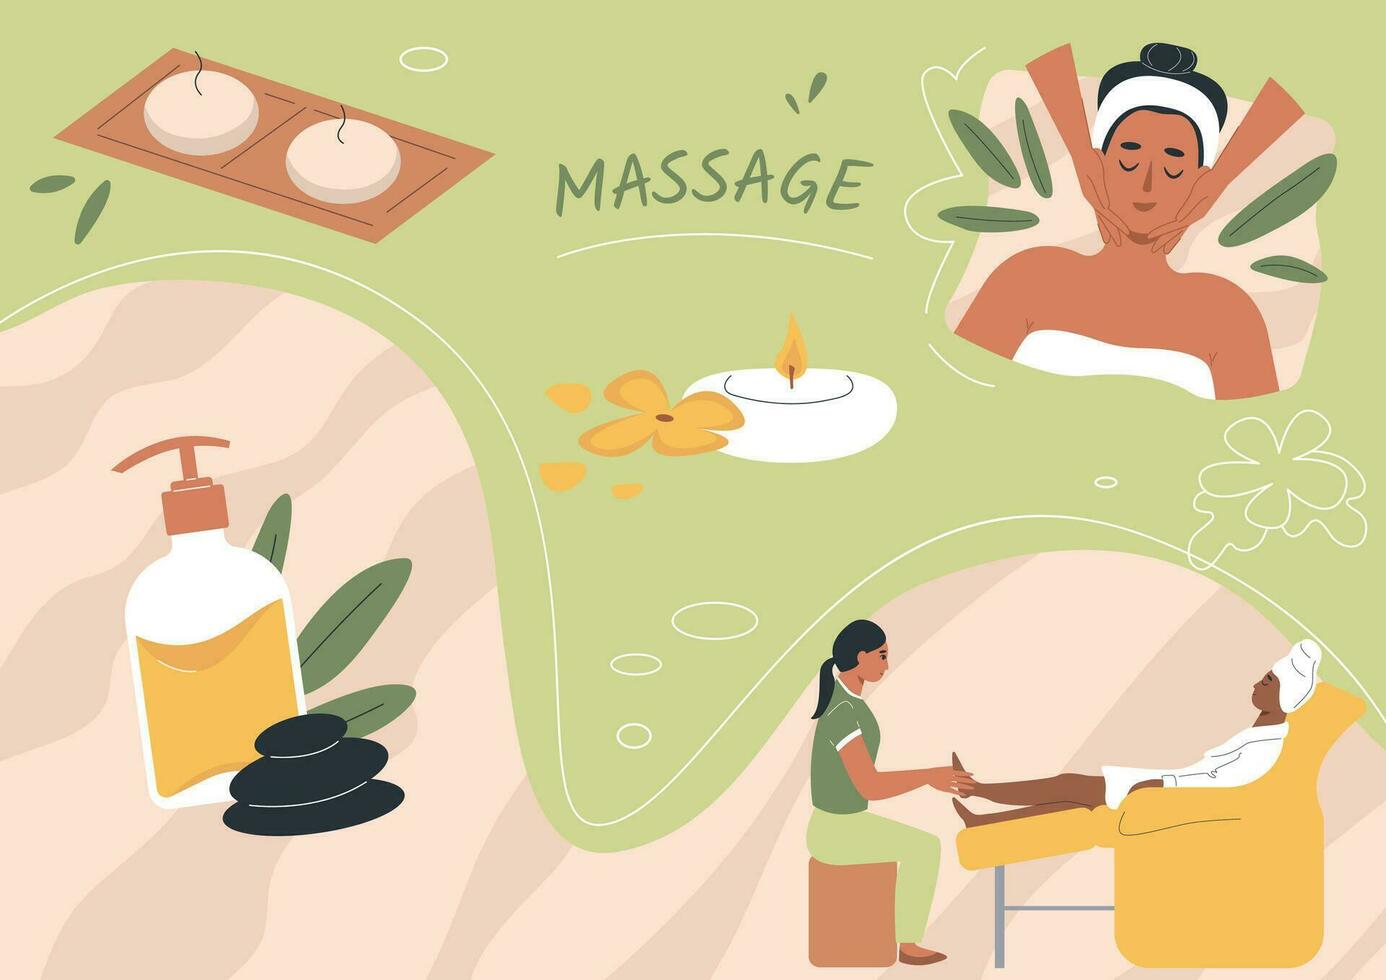 Massage Relax Collage Composition vector